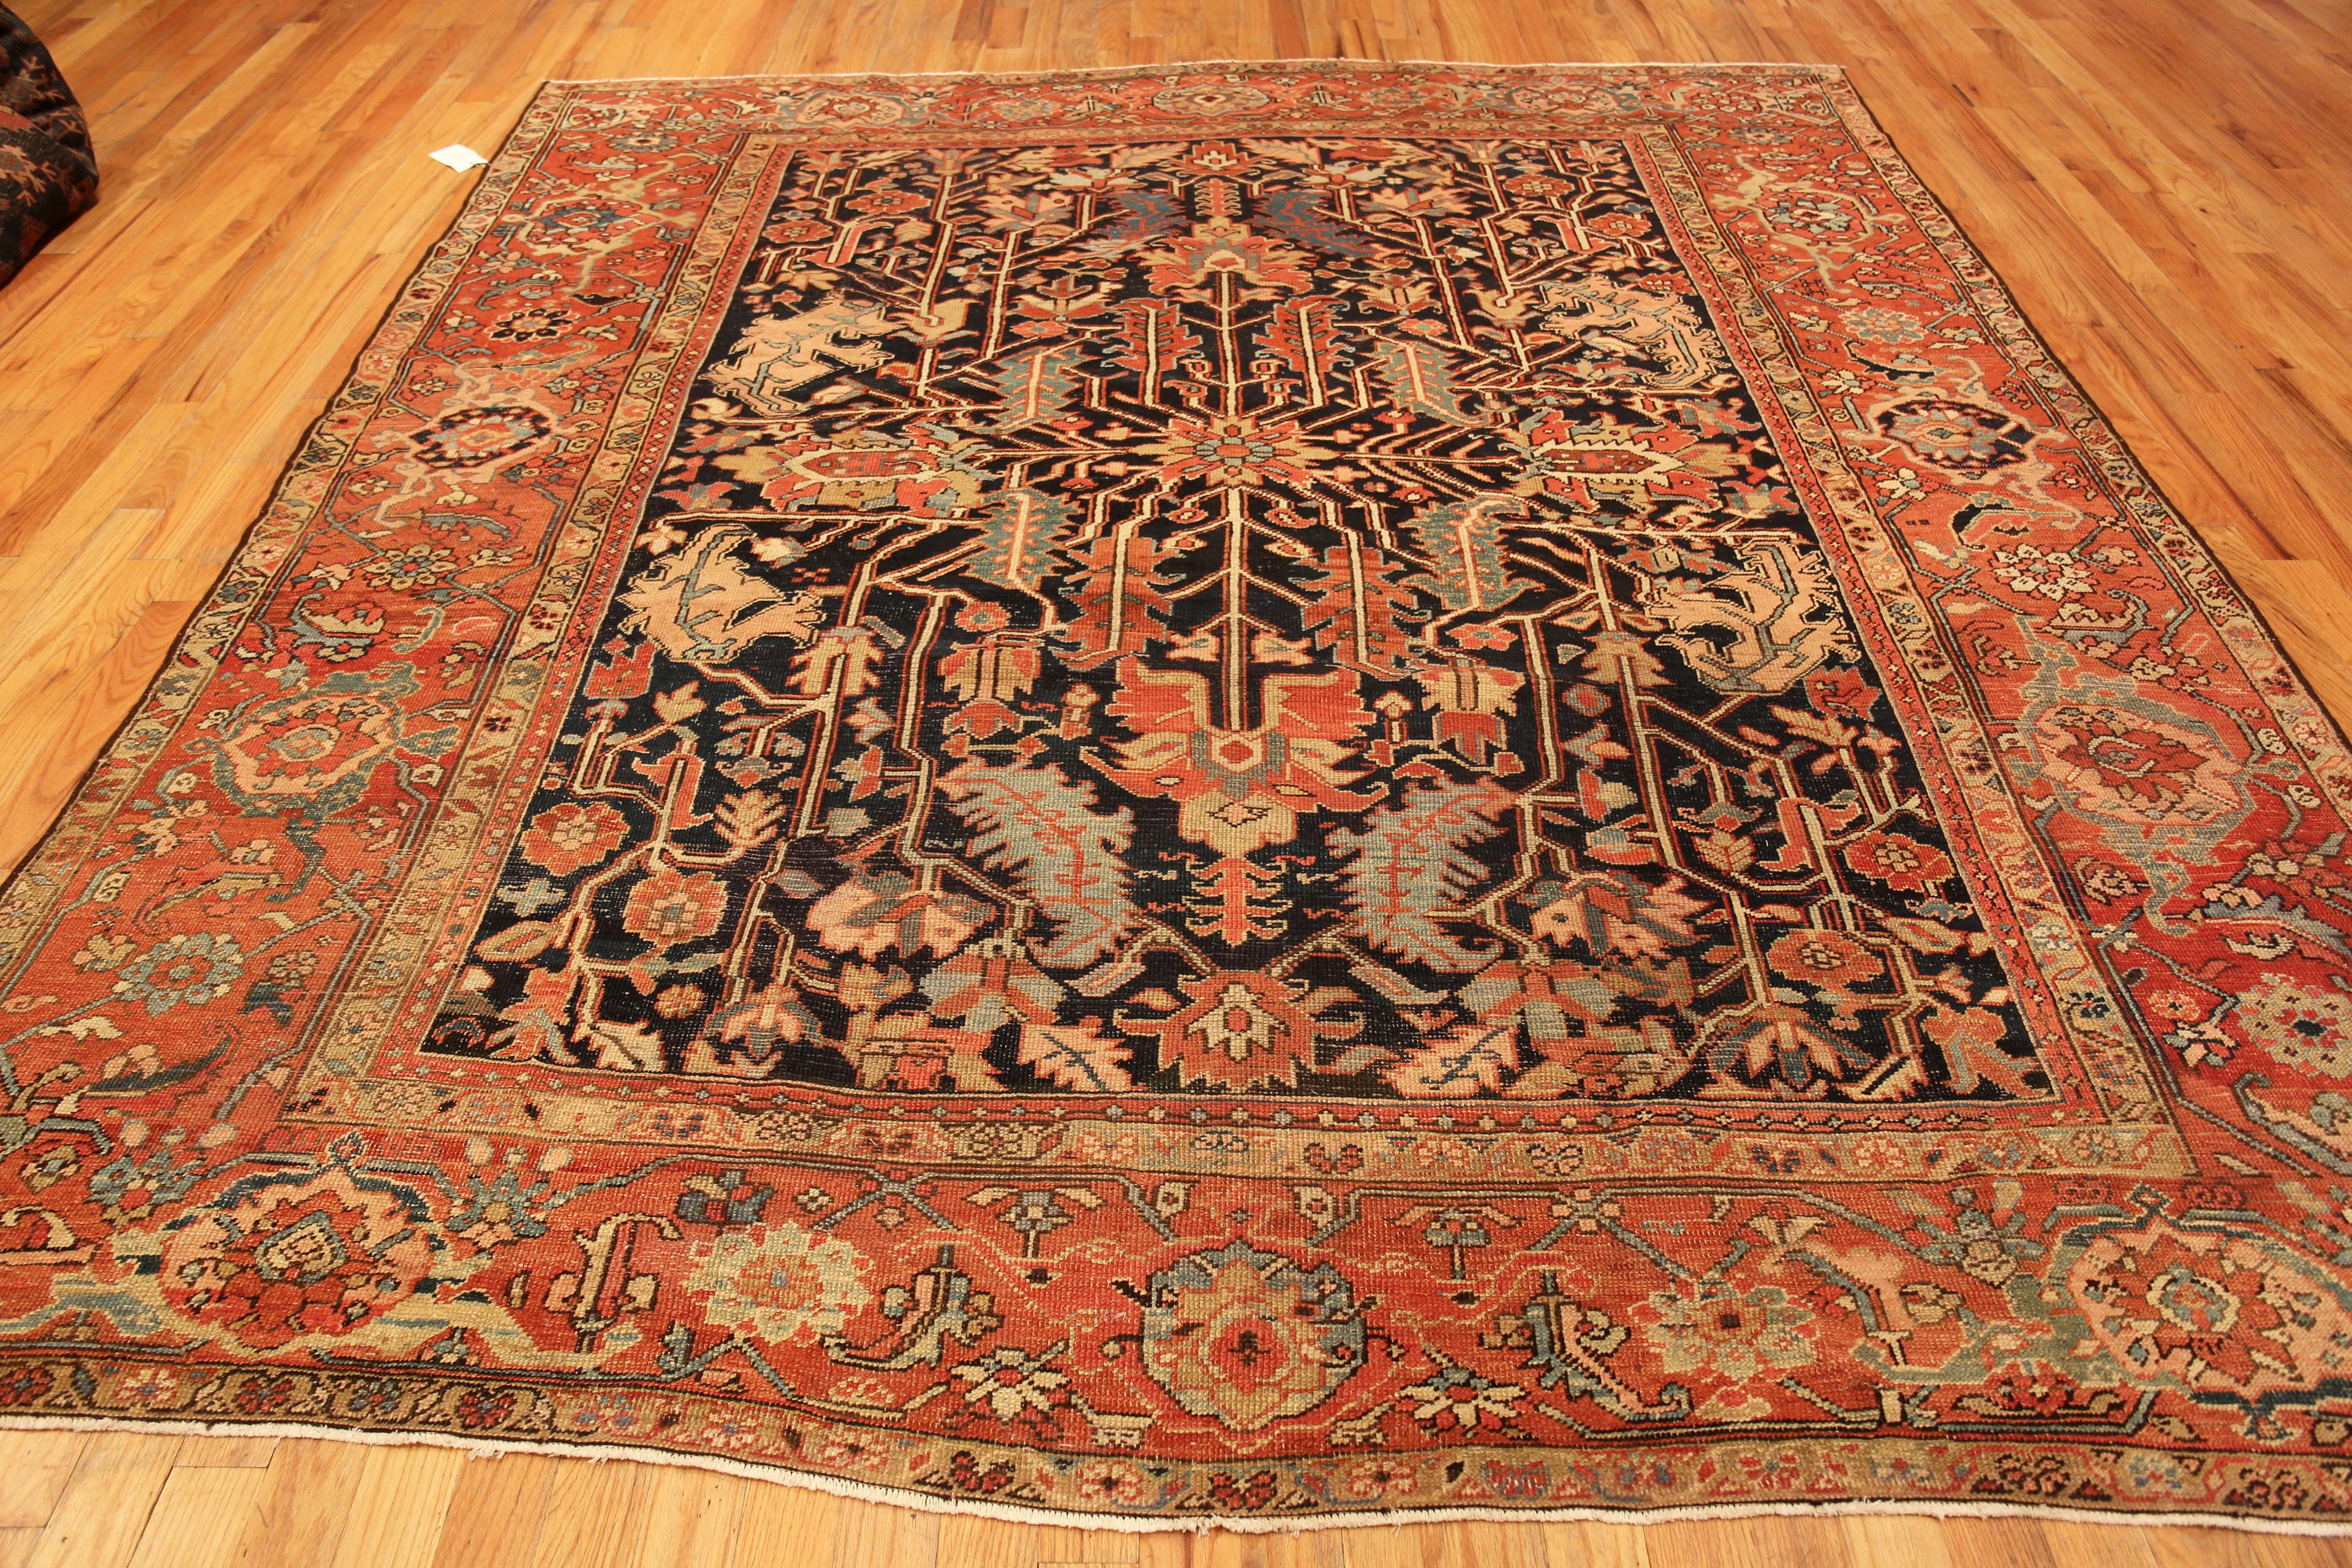 Ancien tapis persan bleu Heriz, Pays d'origine : Perse, Circa date : 1900. Taille : 9 ft 4 in x 10 ft 4 in (2,84 m x 3,15 m)